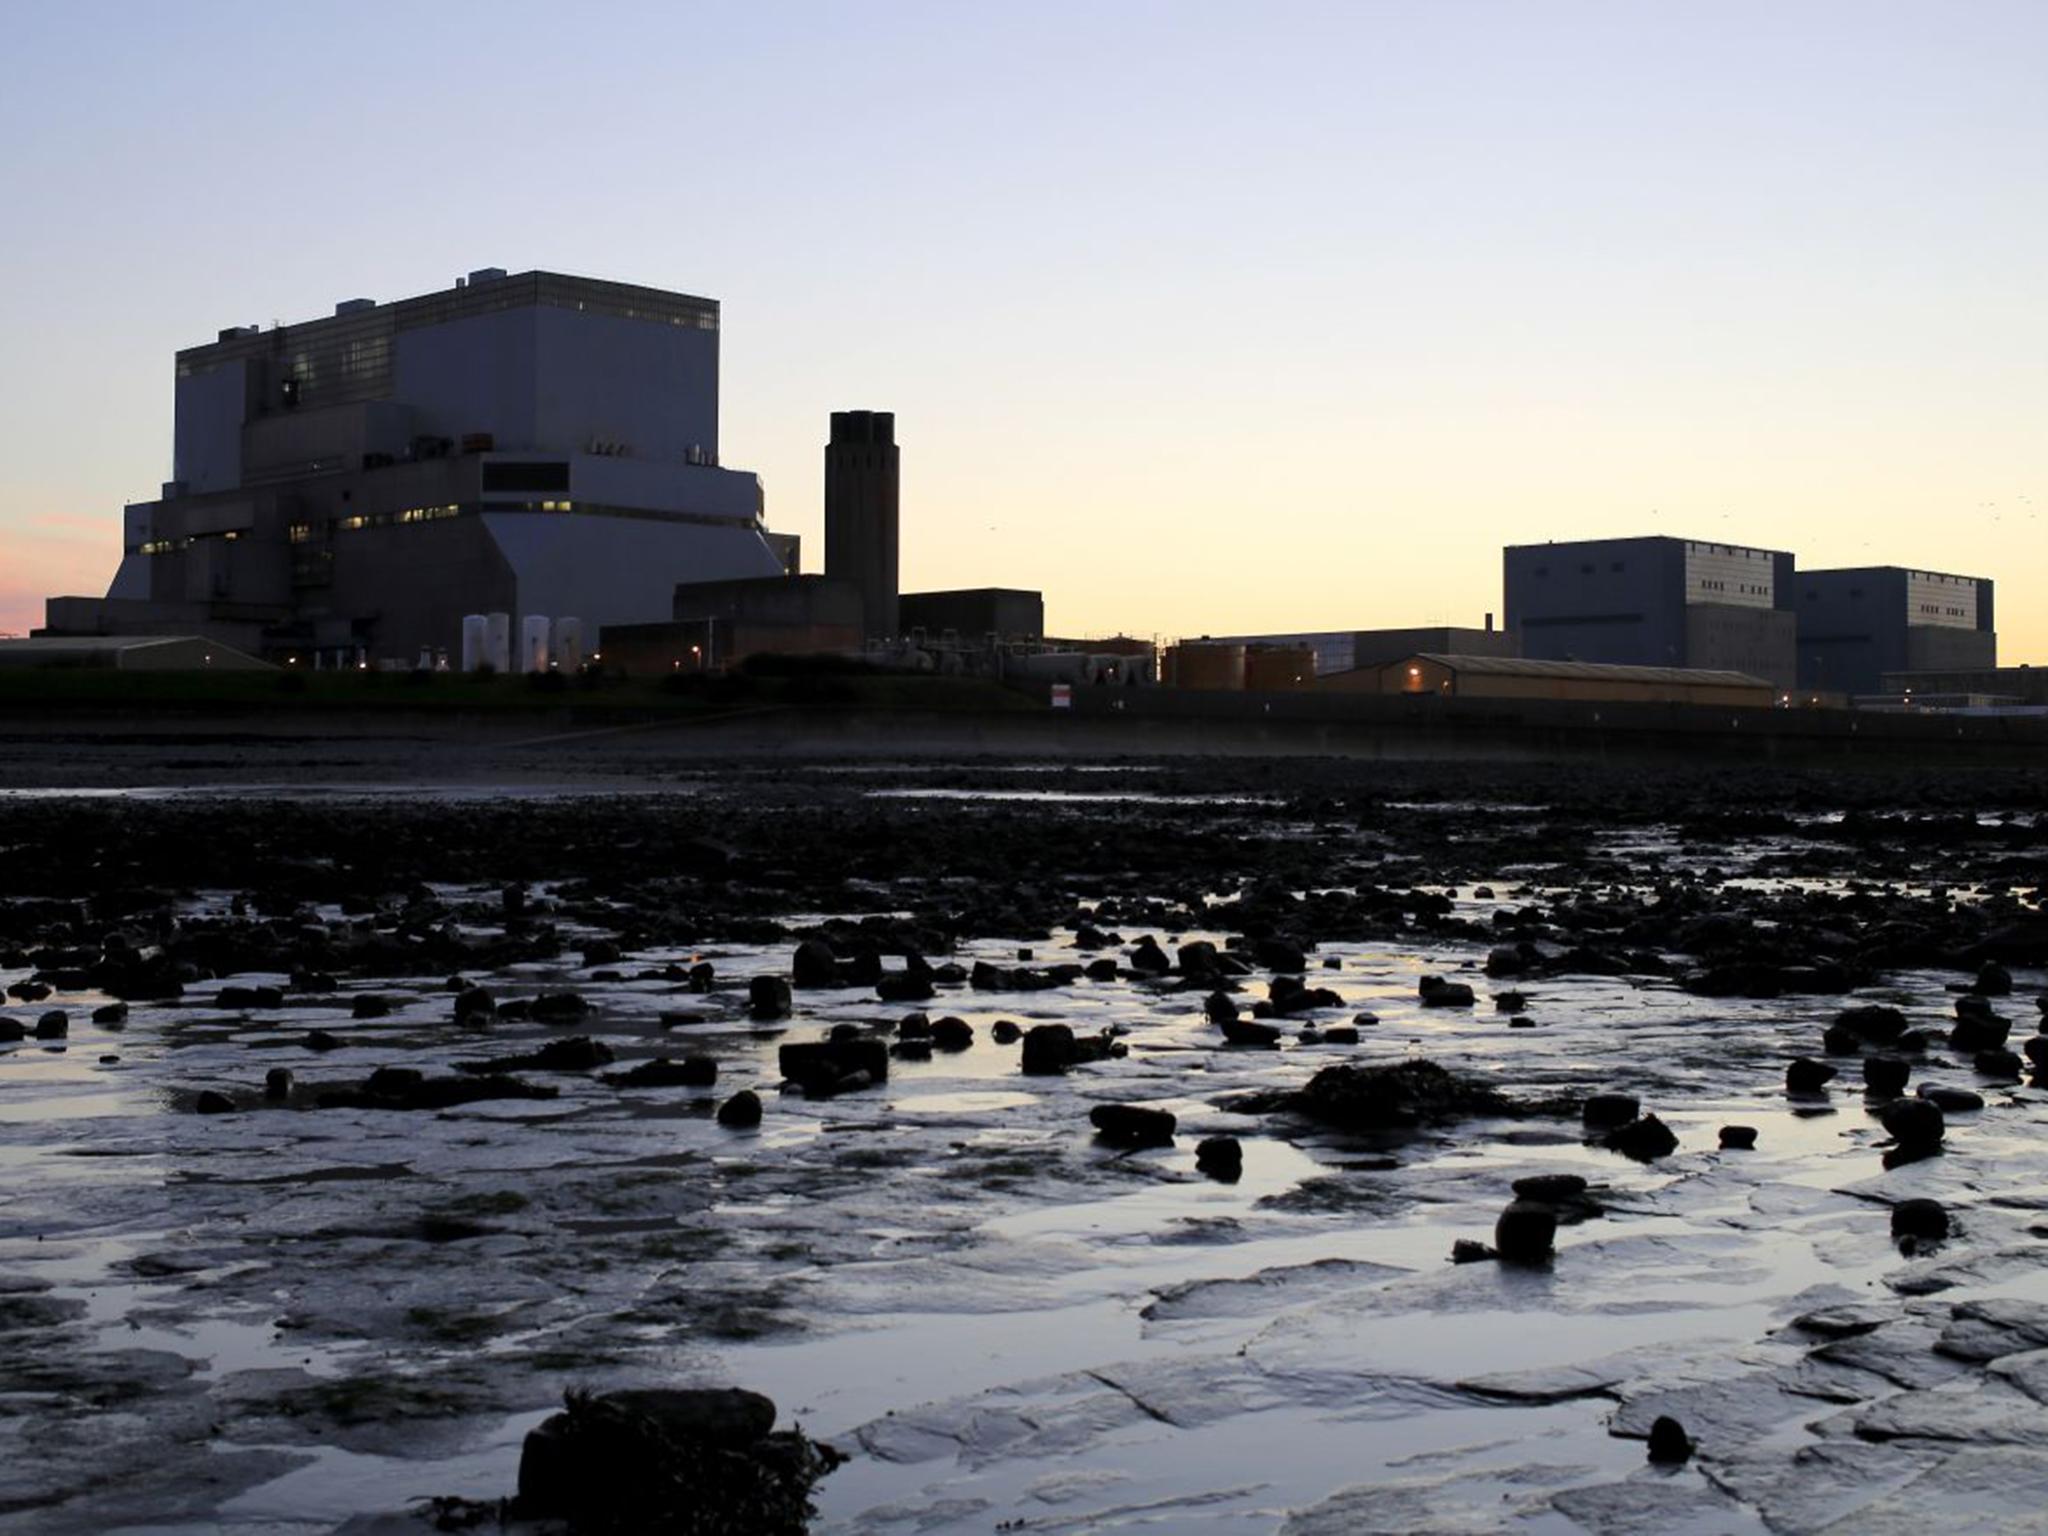 Brighter days ahead for Hinkley nuclear project?